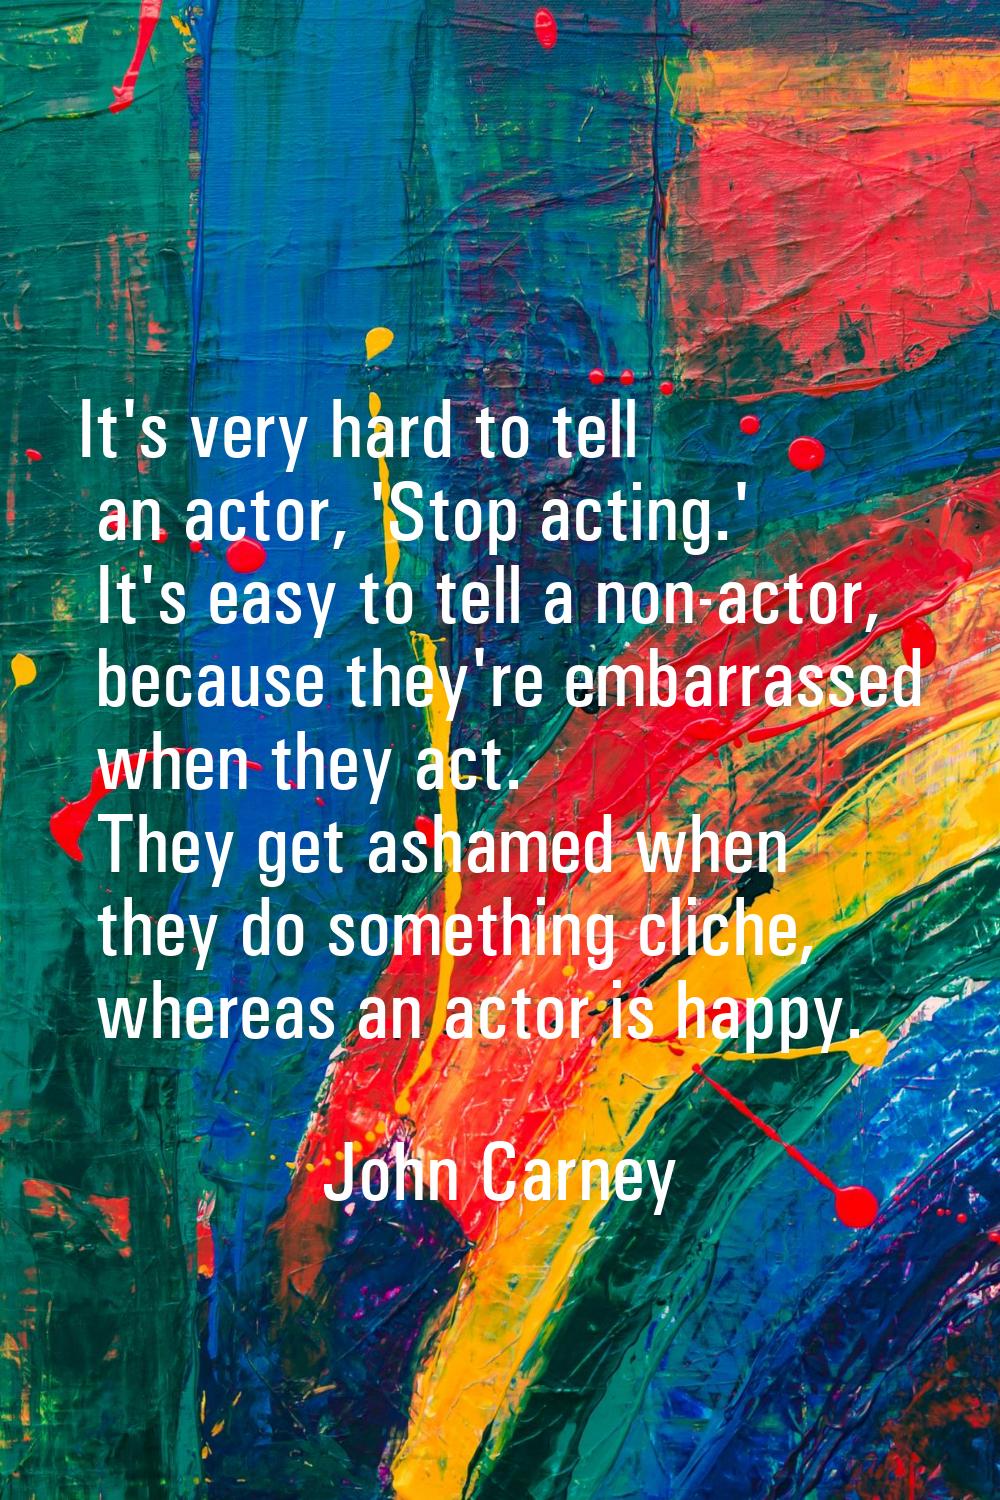 It's very hard to tell an actor, 'Stop acting.' It's easy to tell a non-actor, because they're emba